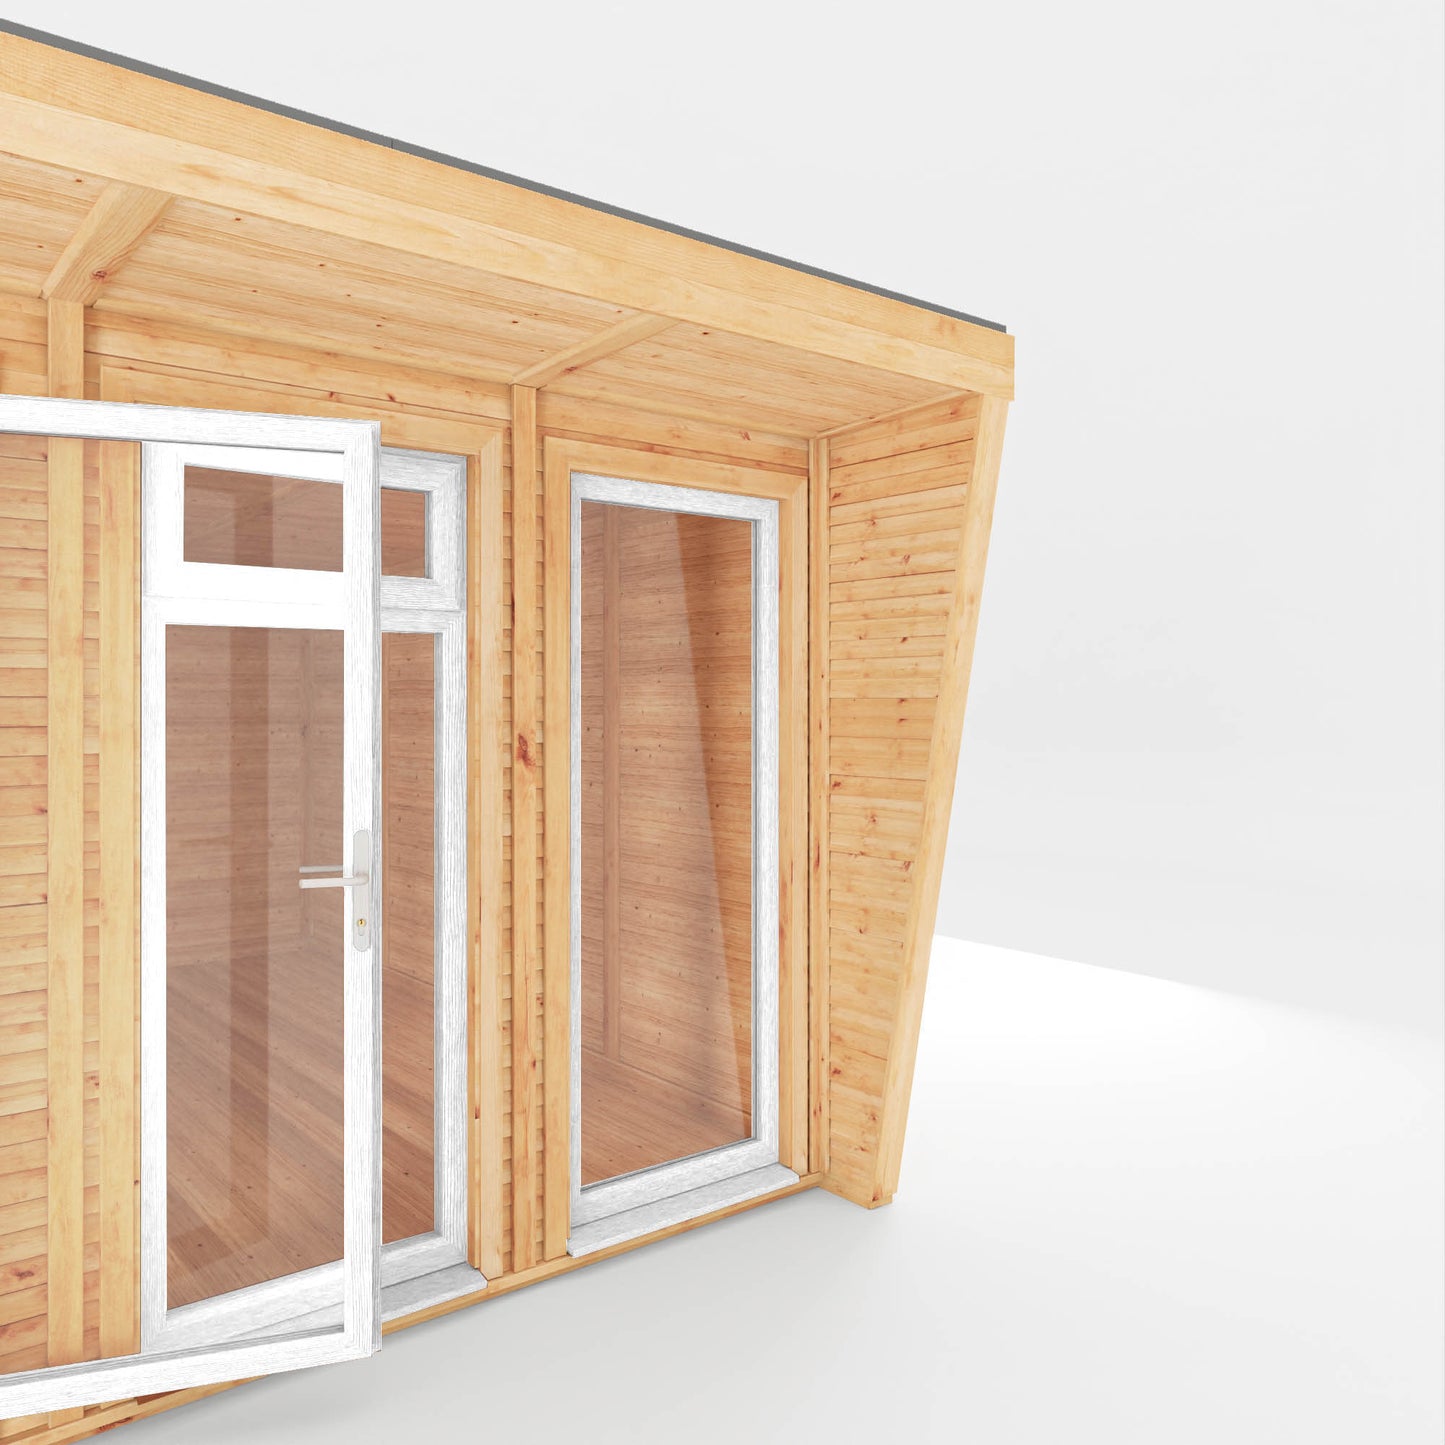 The Harlow 6m x 4m Premium Insulated Garden Room with White UPVC